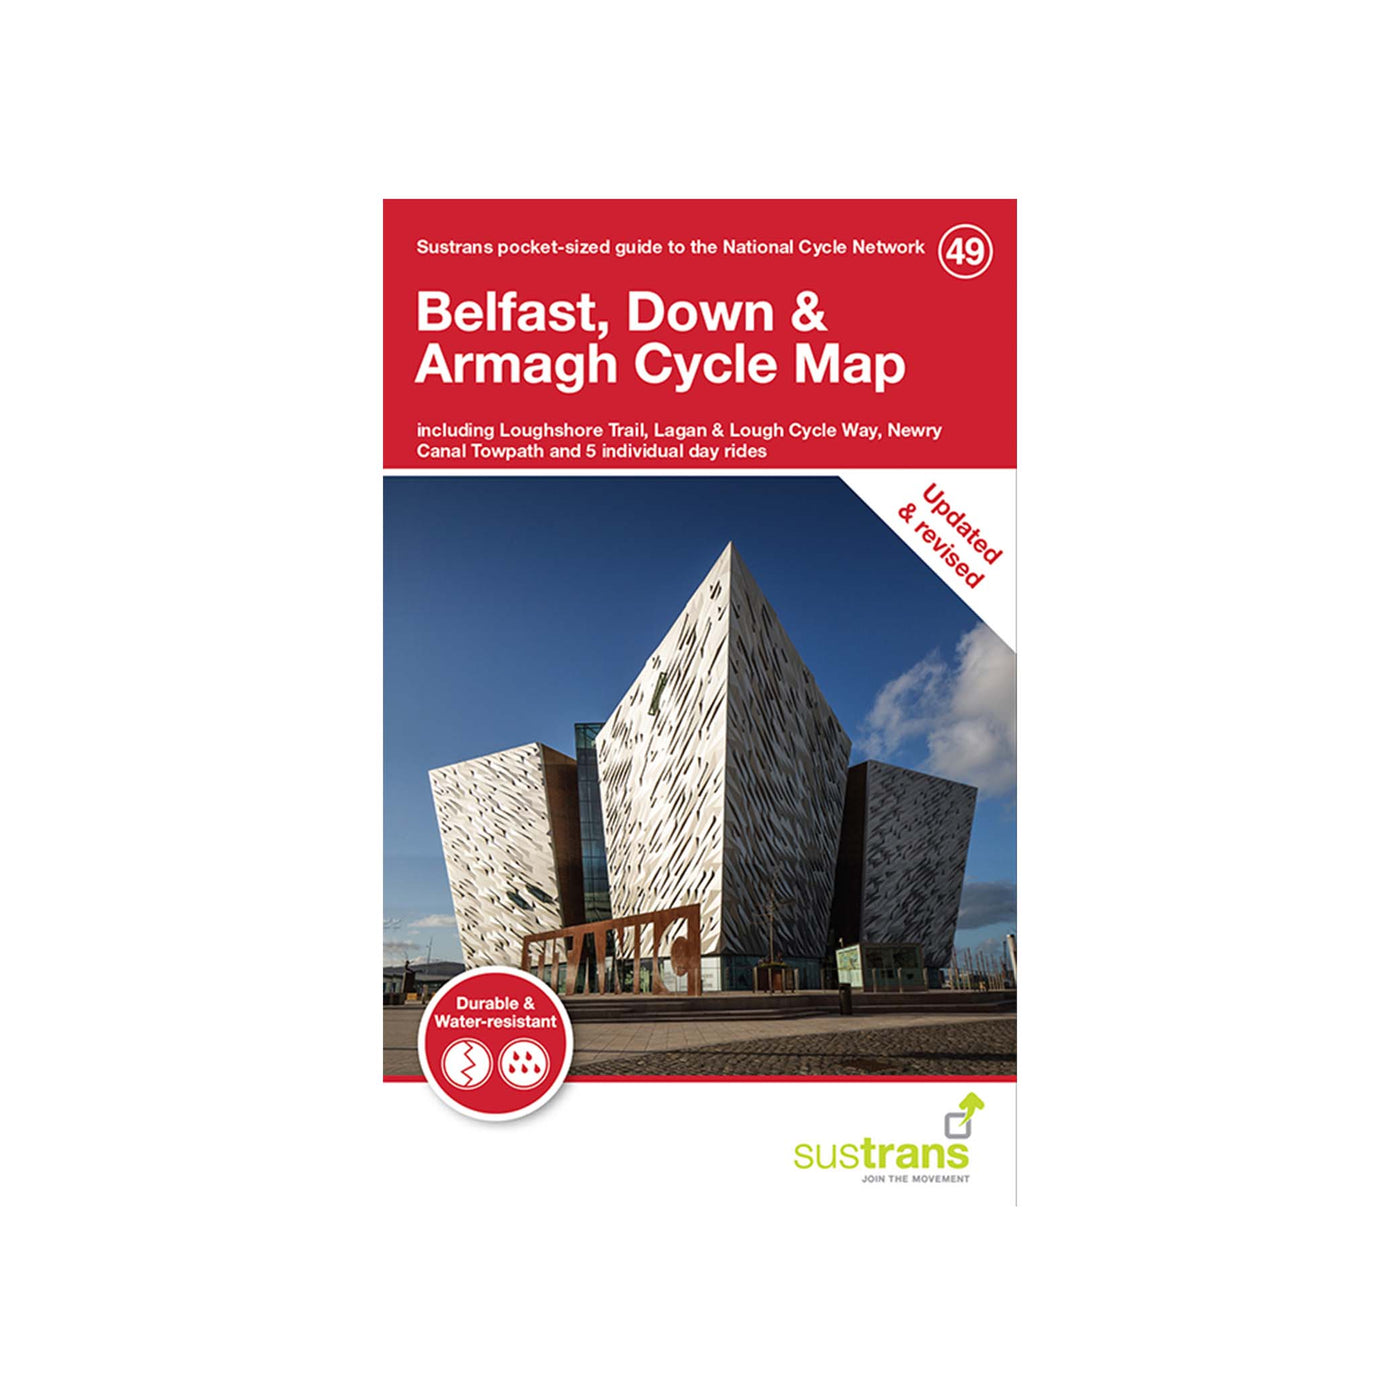 Sustrans Belfast, Down & Armagh Cycle Map (49)